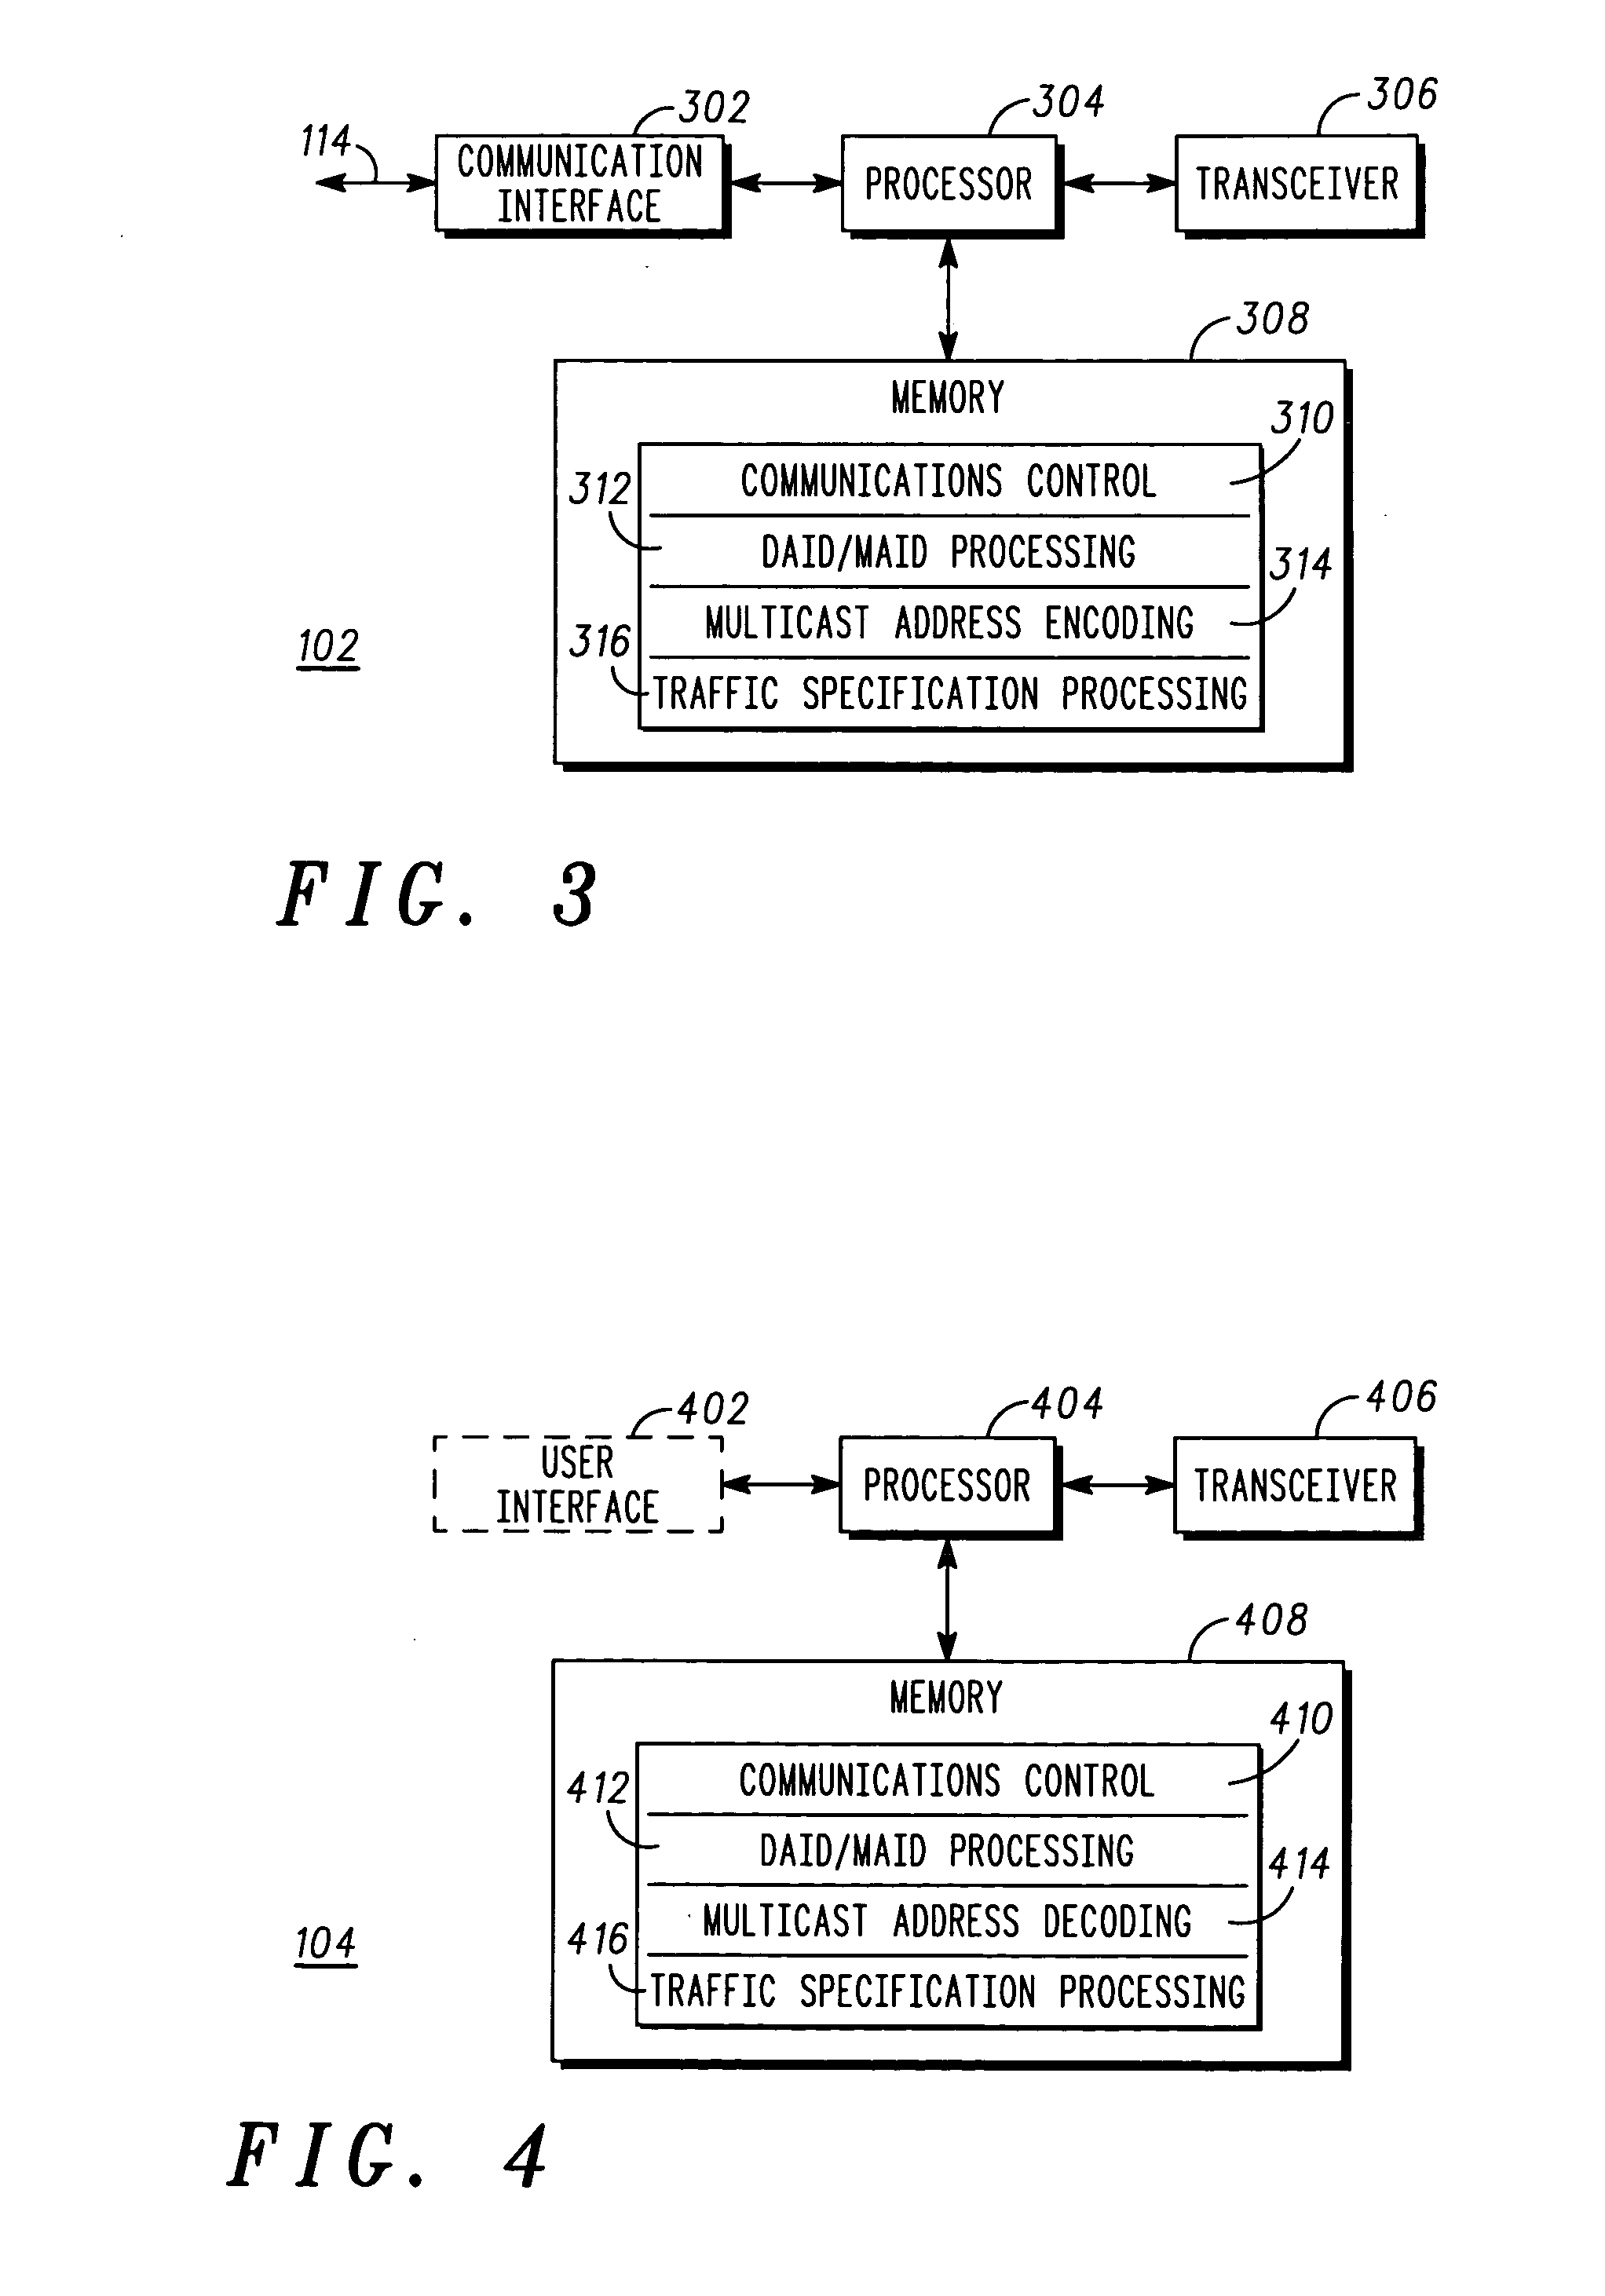 Method and apparatus for sending a multicast message